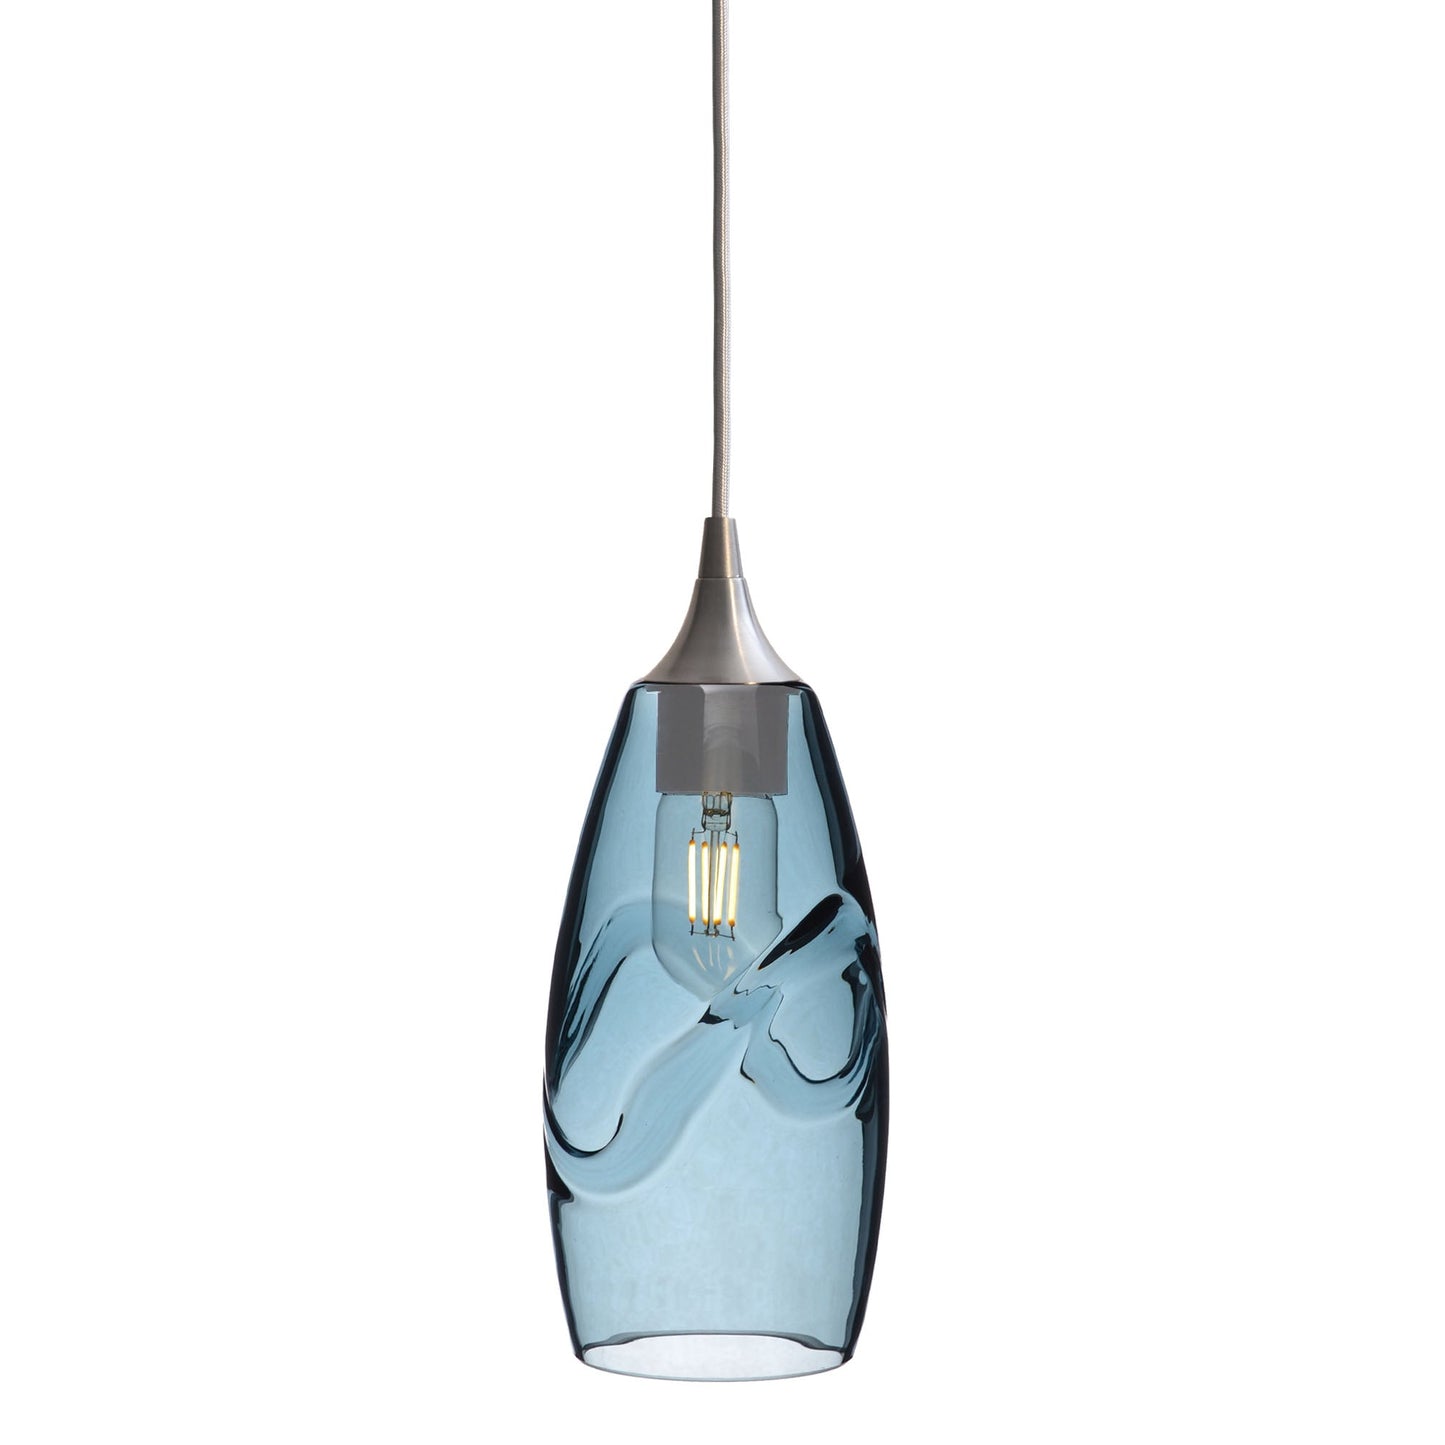 147 Swell: Single Pendant Light-Glass-Bicycle Glass Co - Hotshop-Slate Gray-Brushed Nickel-Bicycle Glass Co